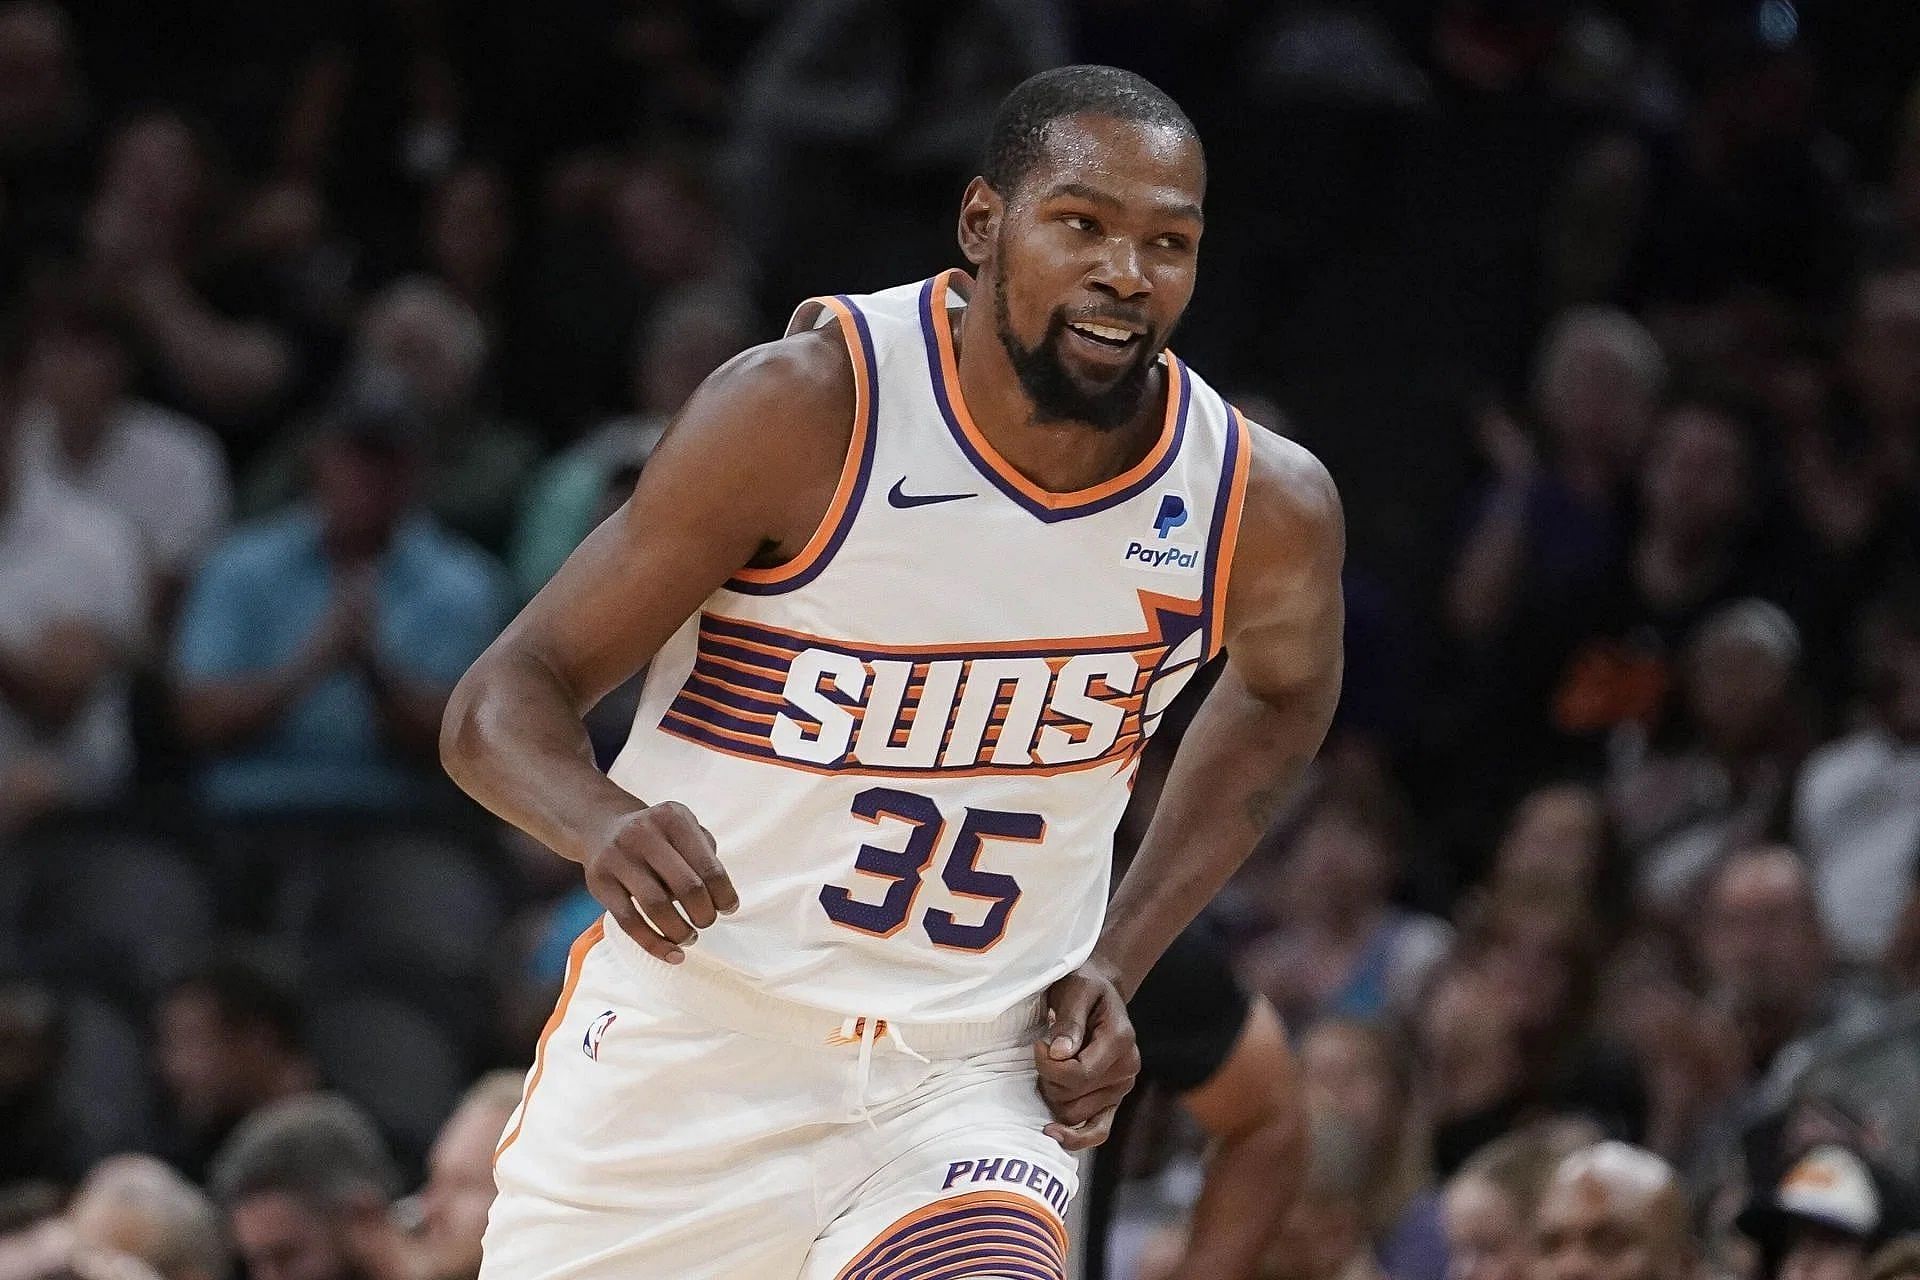 For his consistent solid play early in the season, Kevin Durant of the Phoenix Suns is considered as among the top contenders for the NBA MVP award.